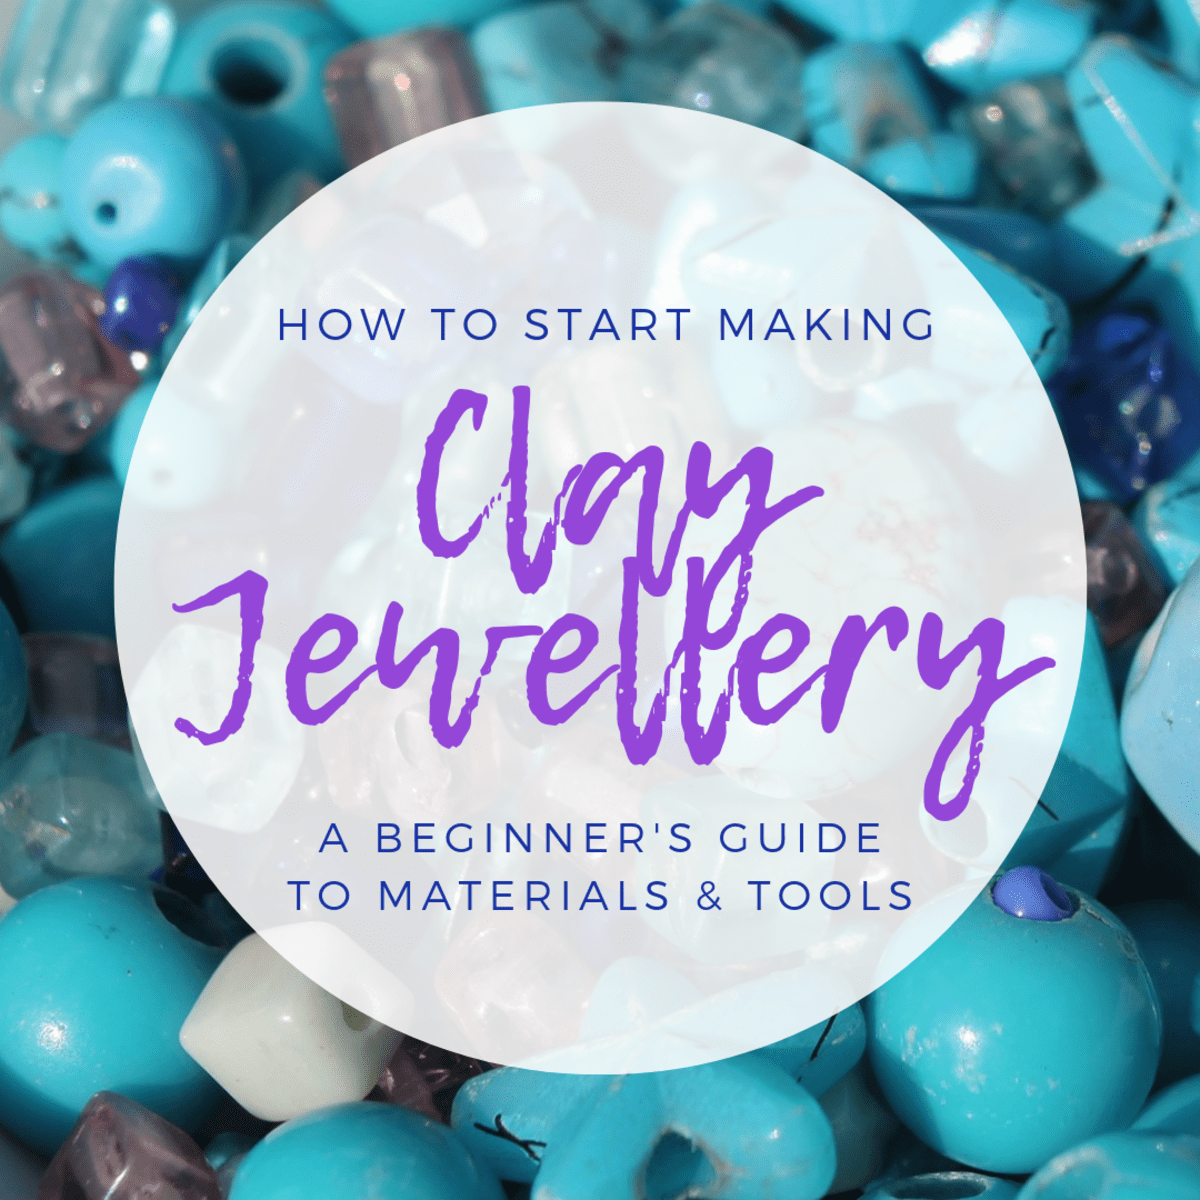 How to Start a Polymer Clay Business